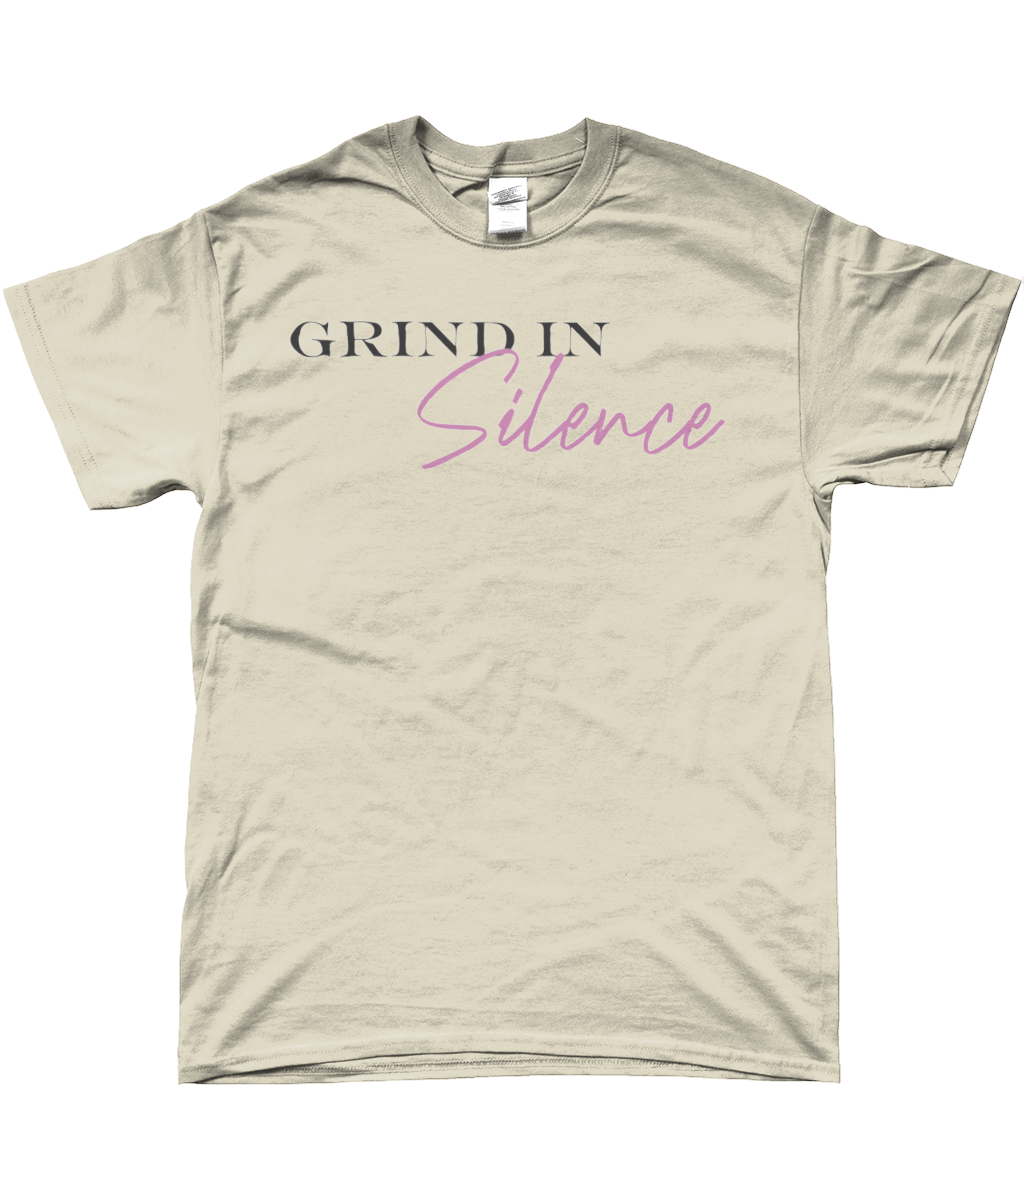 GRIND IN SILENCE T-SHIRT